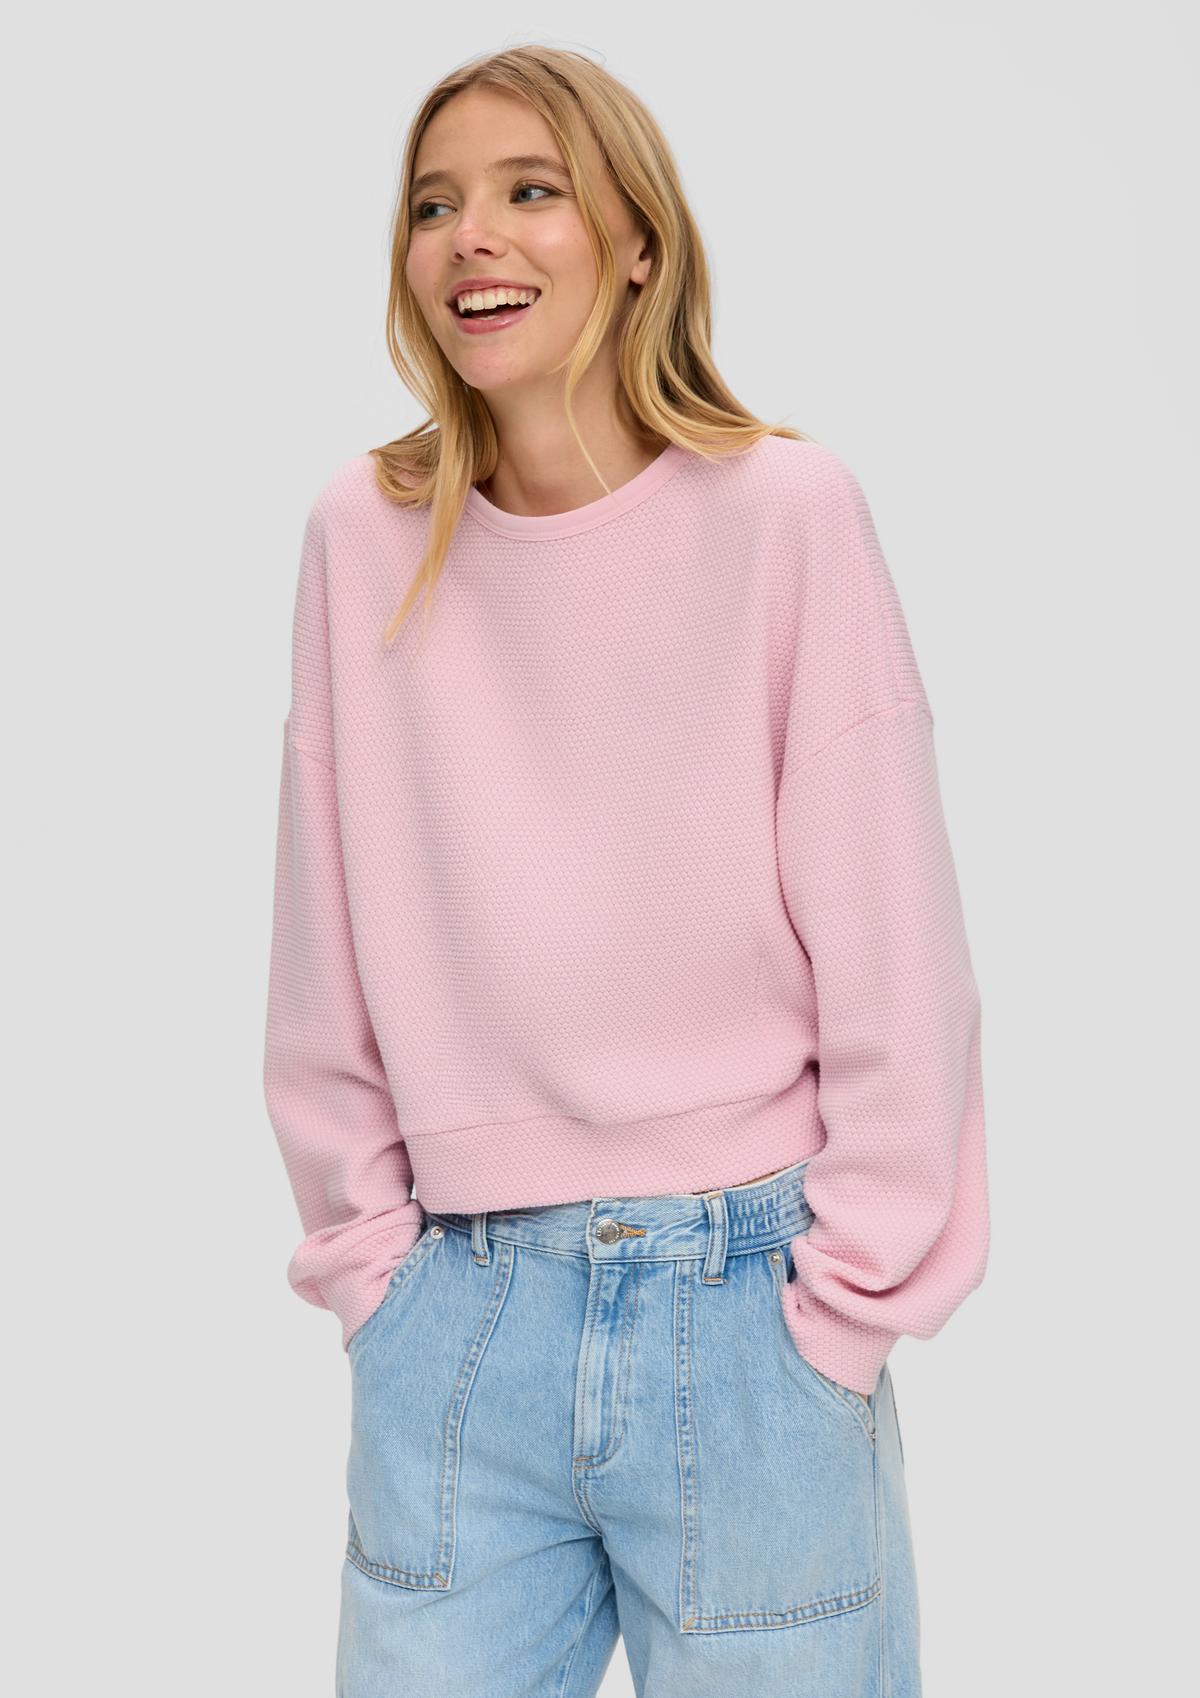 s.Oliver Sweatshirt in a boxy cut with a piqué texture